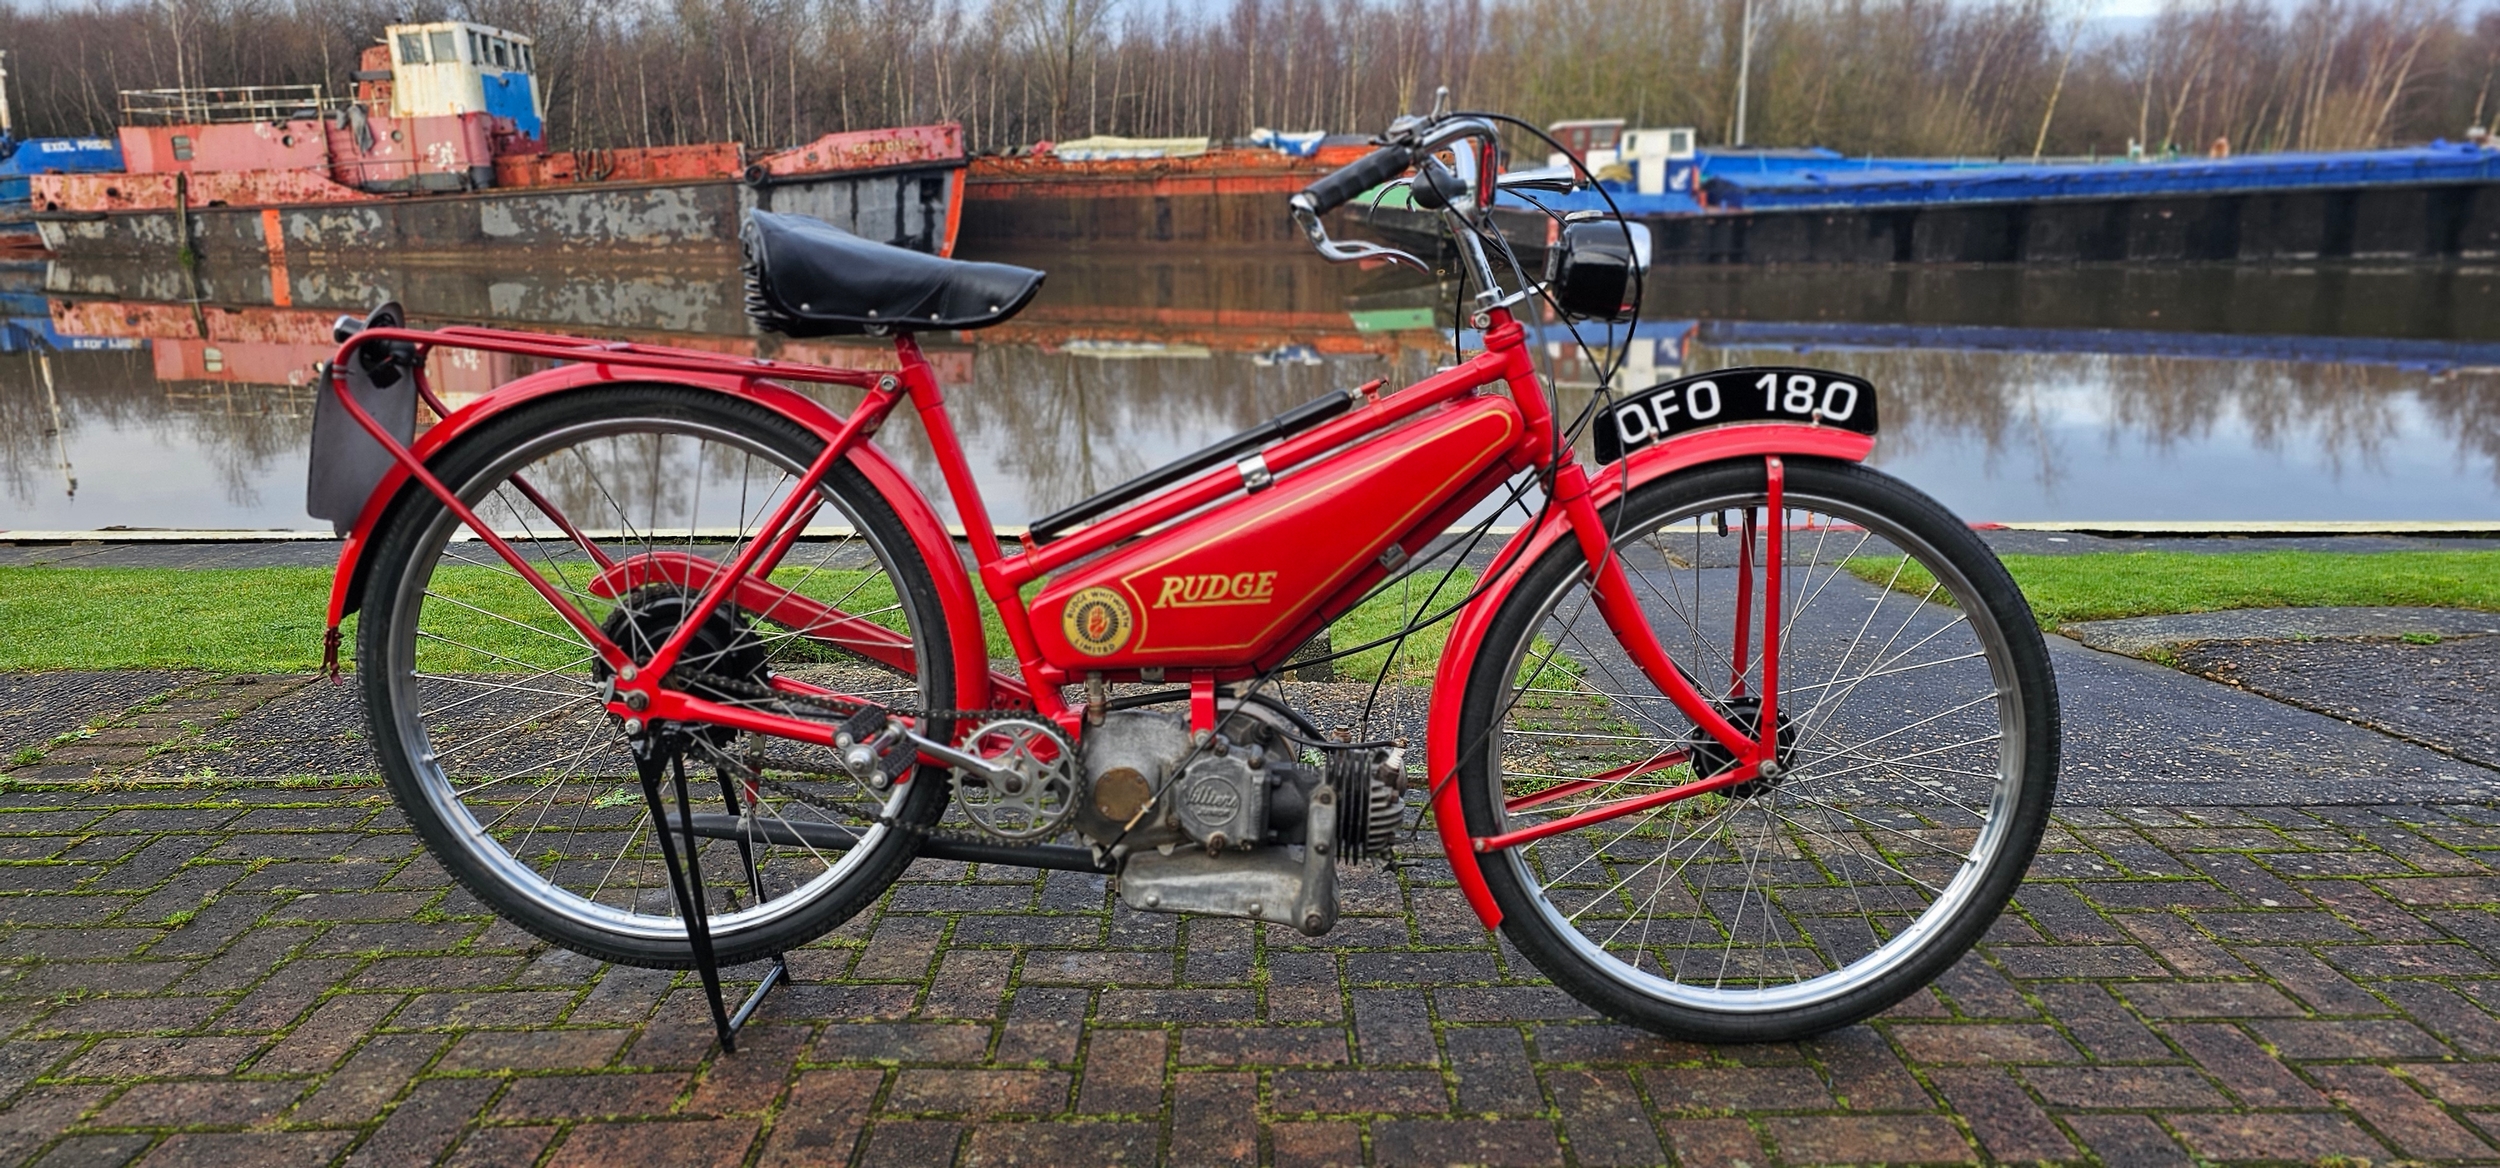 1940 Rudge Autocycle, 98cc. Registration number OFO 180 (non transferrable). Frame number 3031.